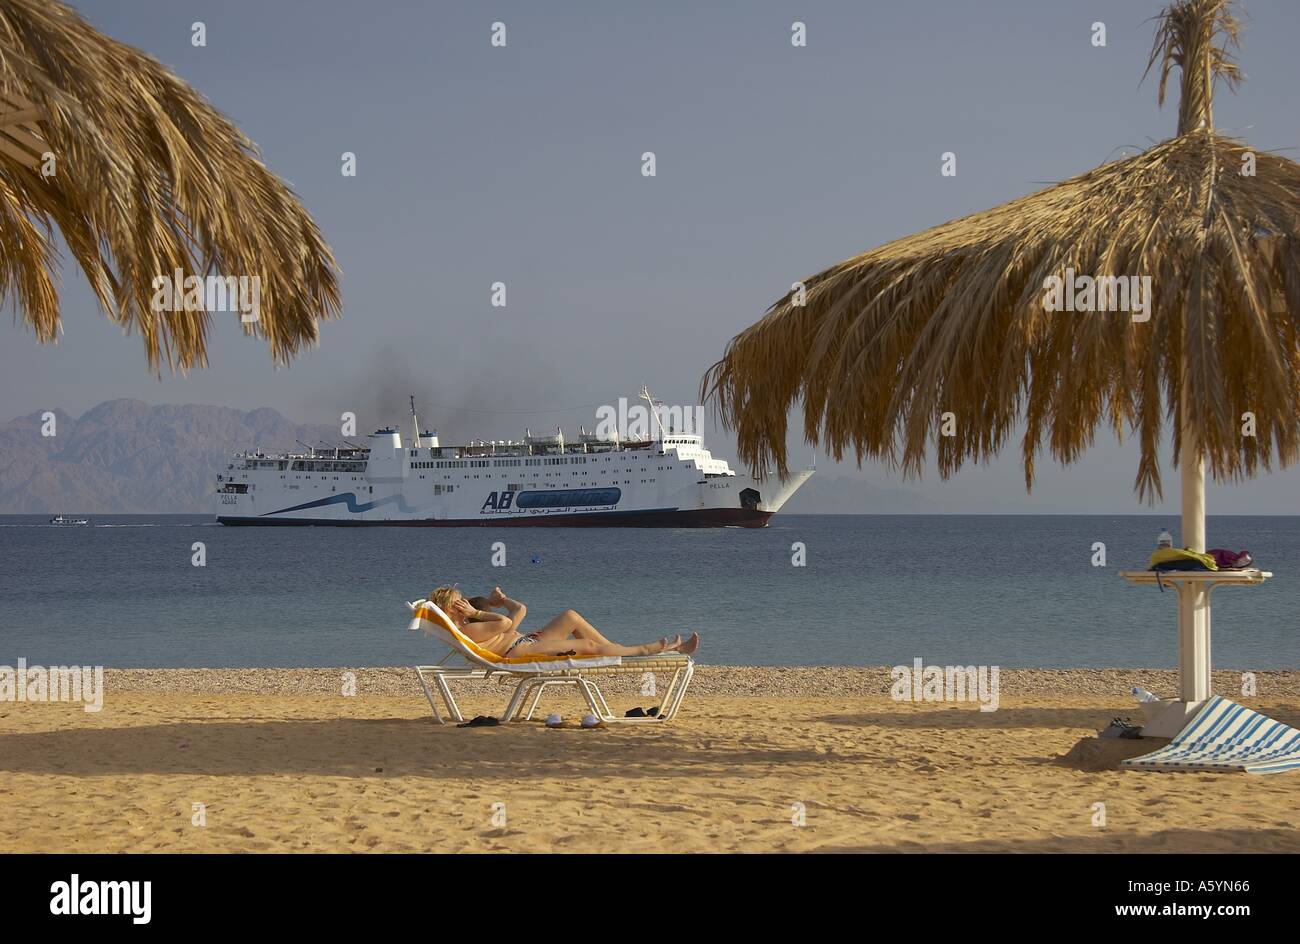 vacationers on beach / ferry in background Stock Photo